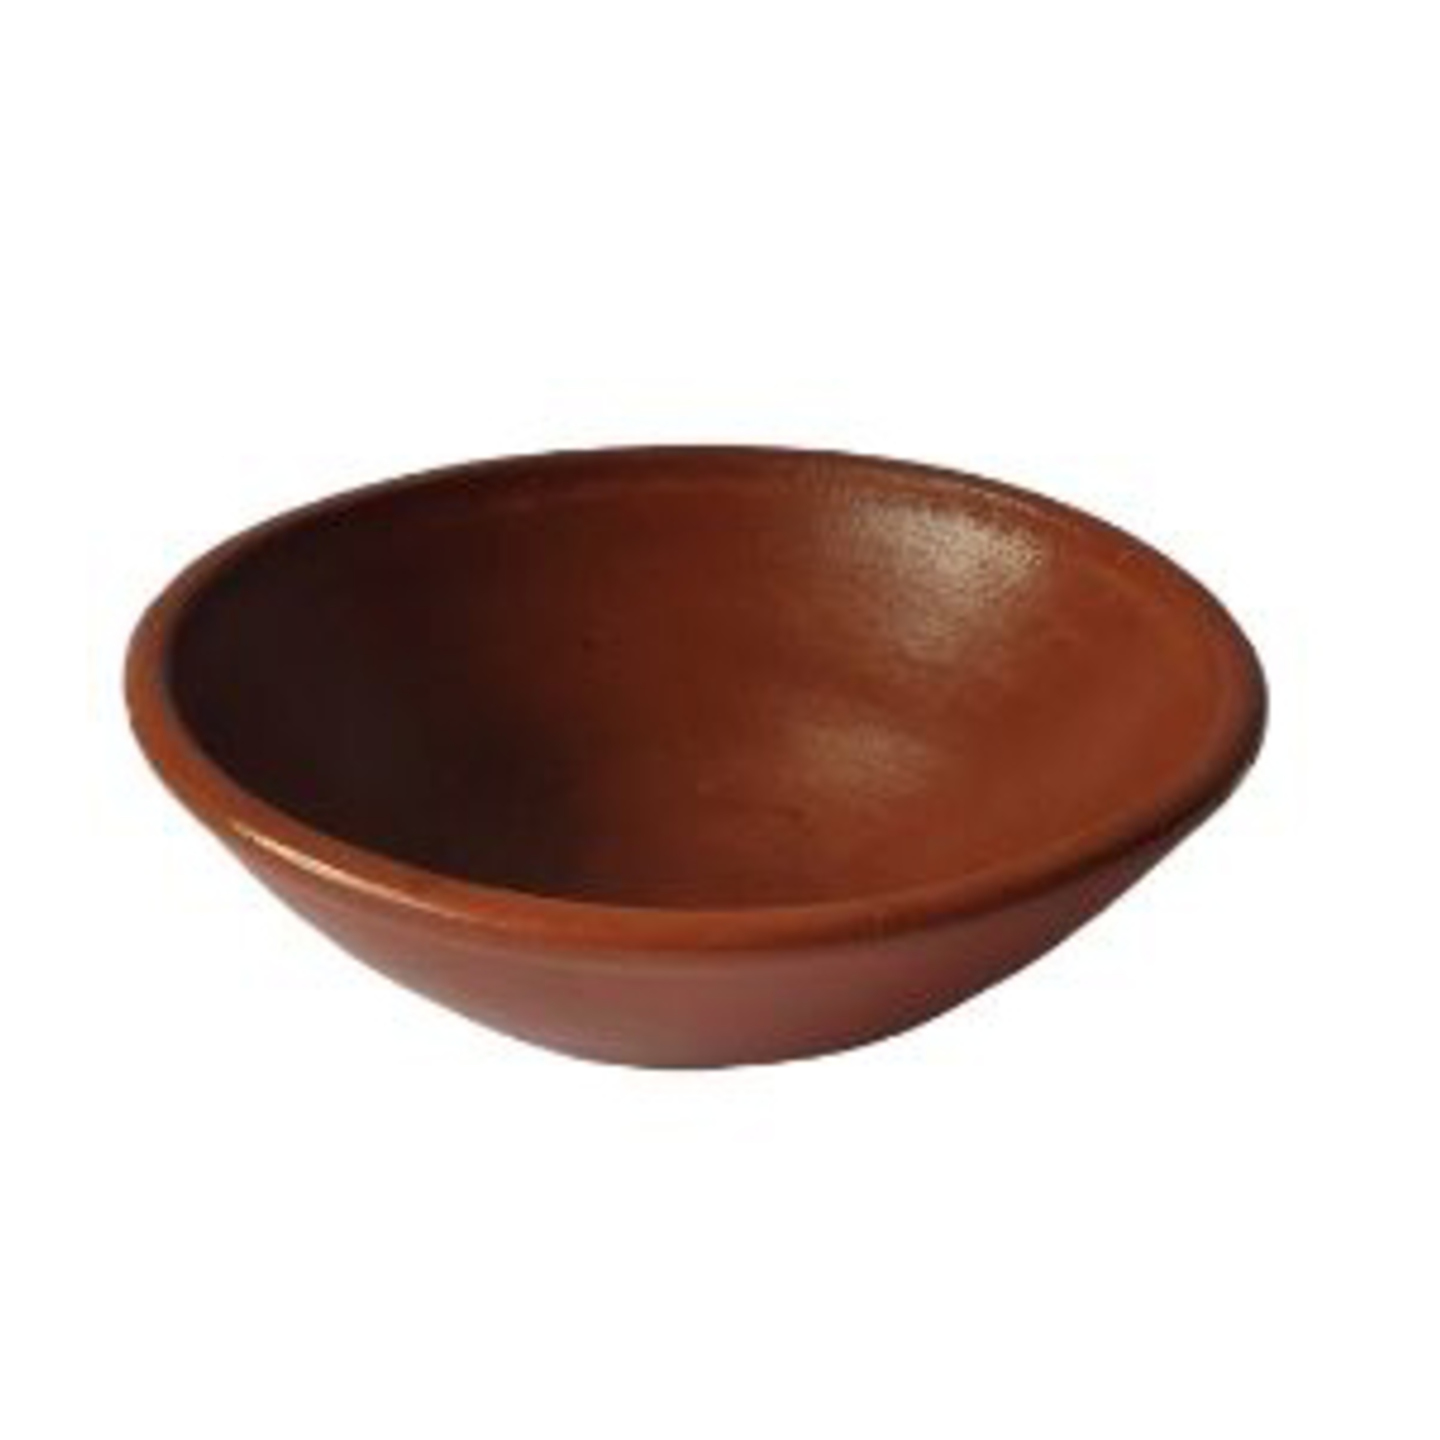 Earthling All Nature Clay serving bowl 8set of 2